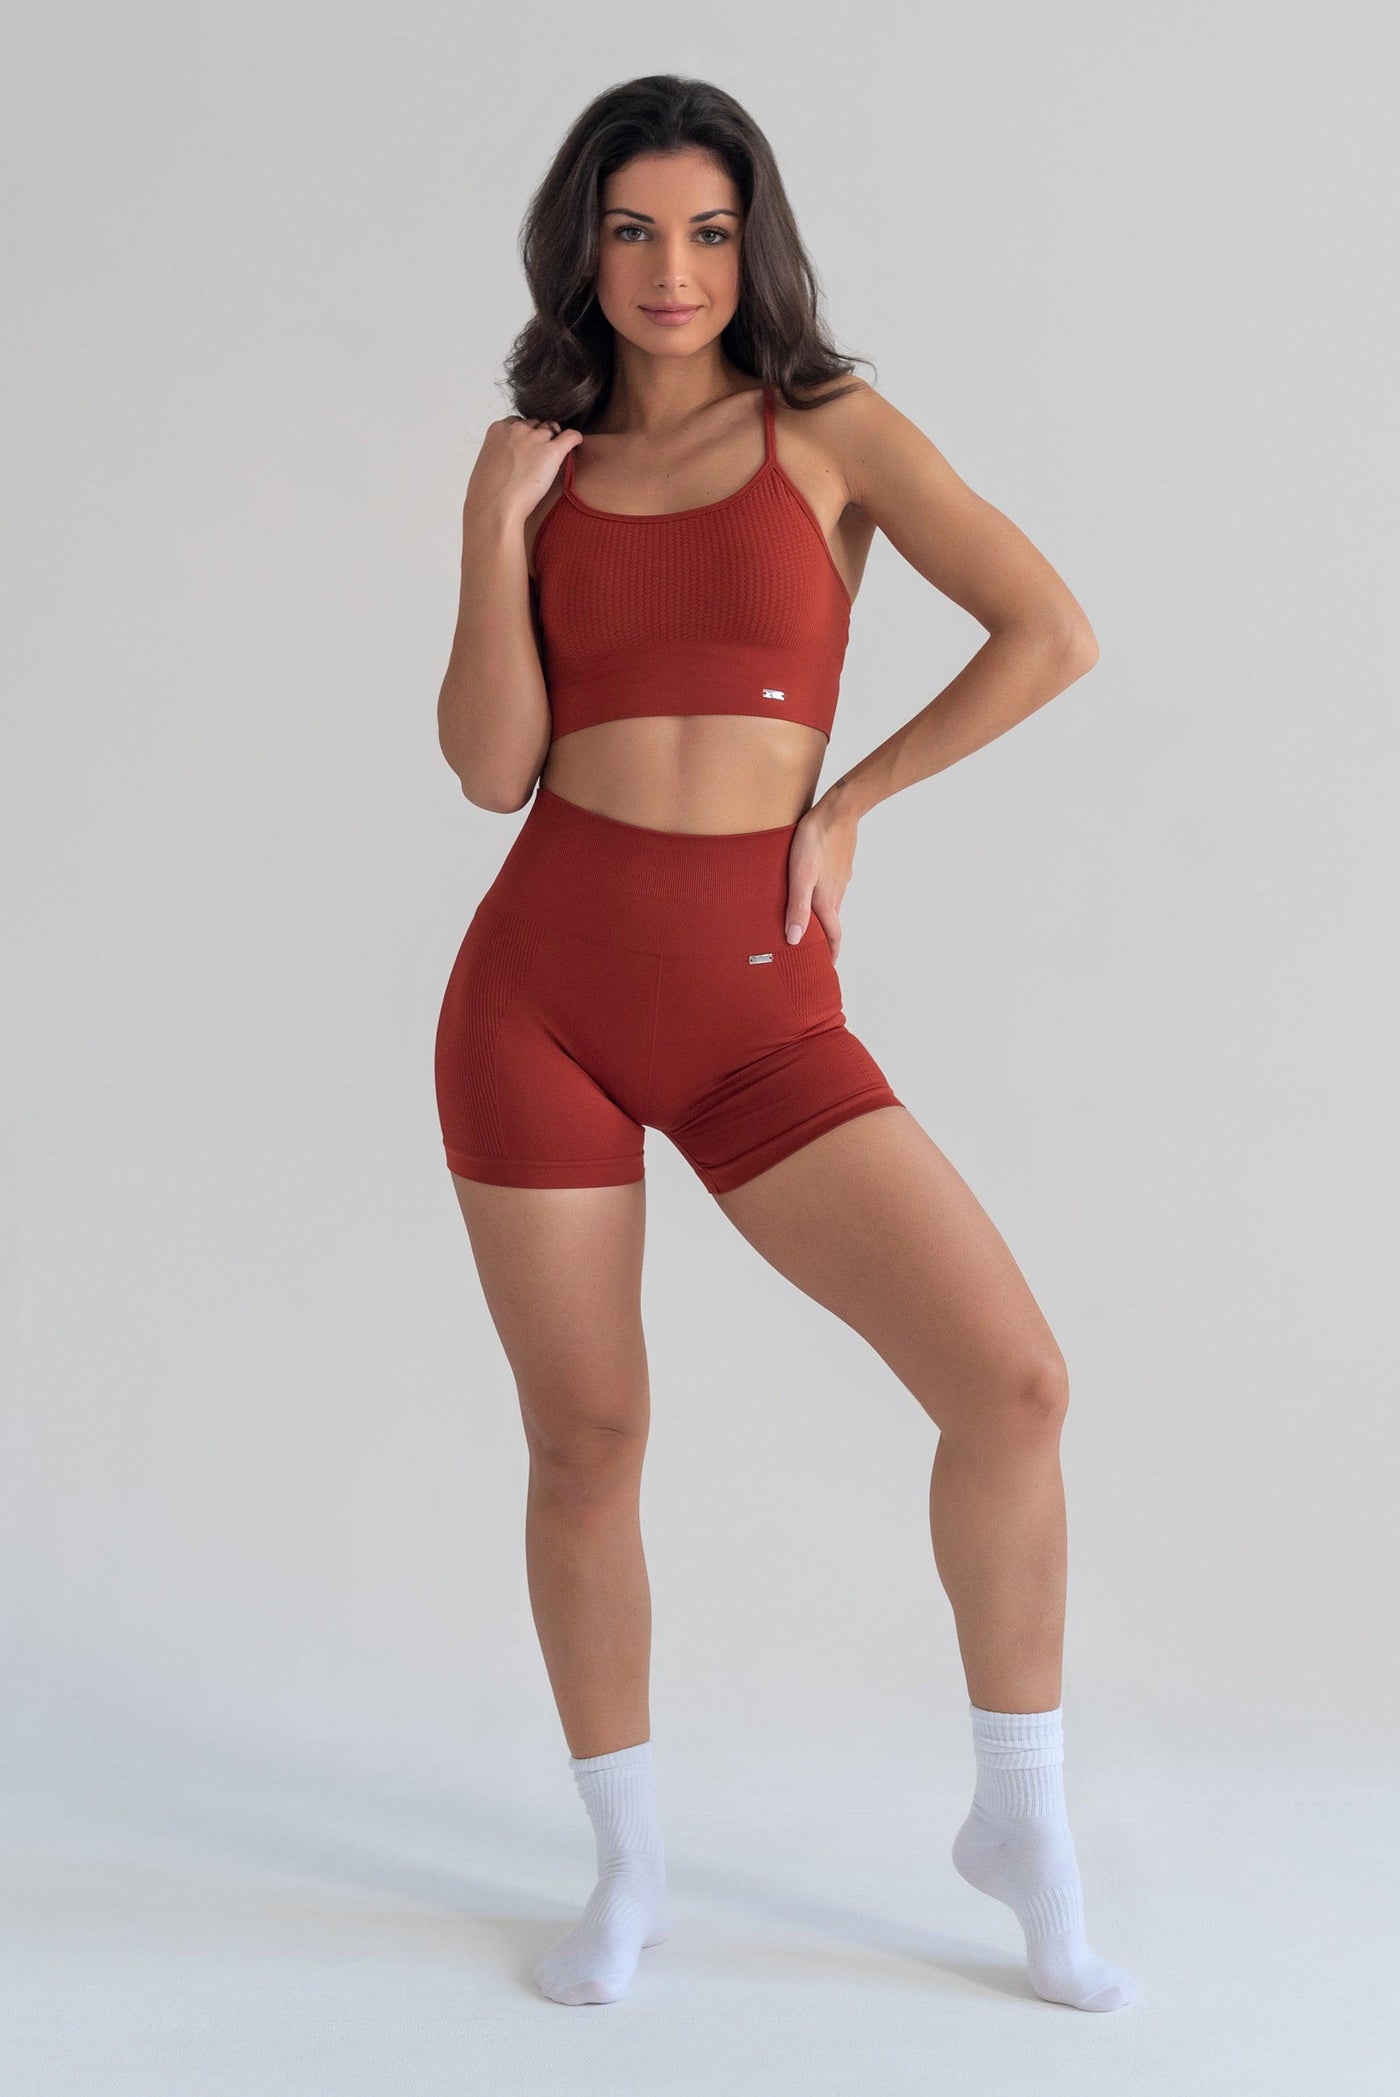 Bliss Short Push-Up en Chili-Shorts-Tienda Ropa Leggings Yoga Sostenibles Reciclados Mujer On-line Barcelona Believe Athletics Sustainable Recycled Yoga Clothes